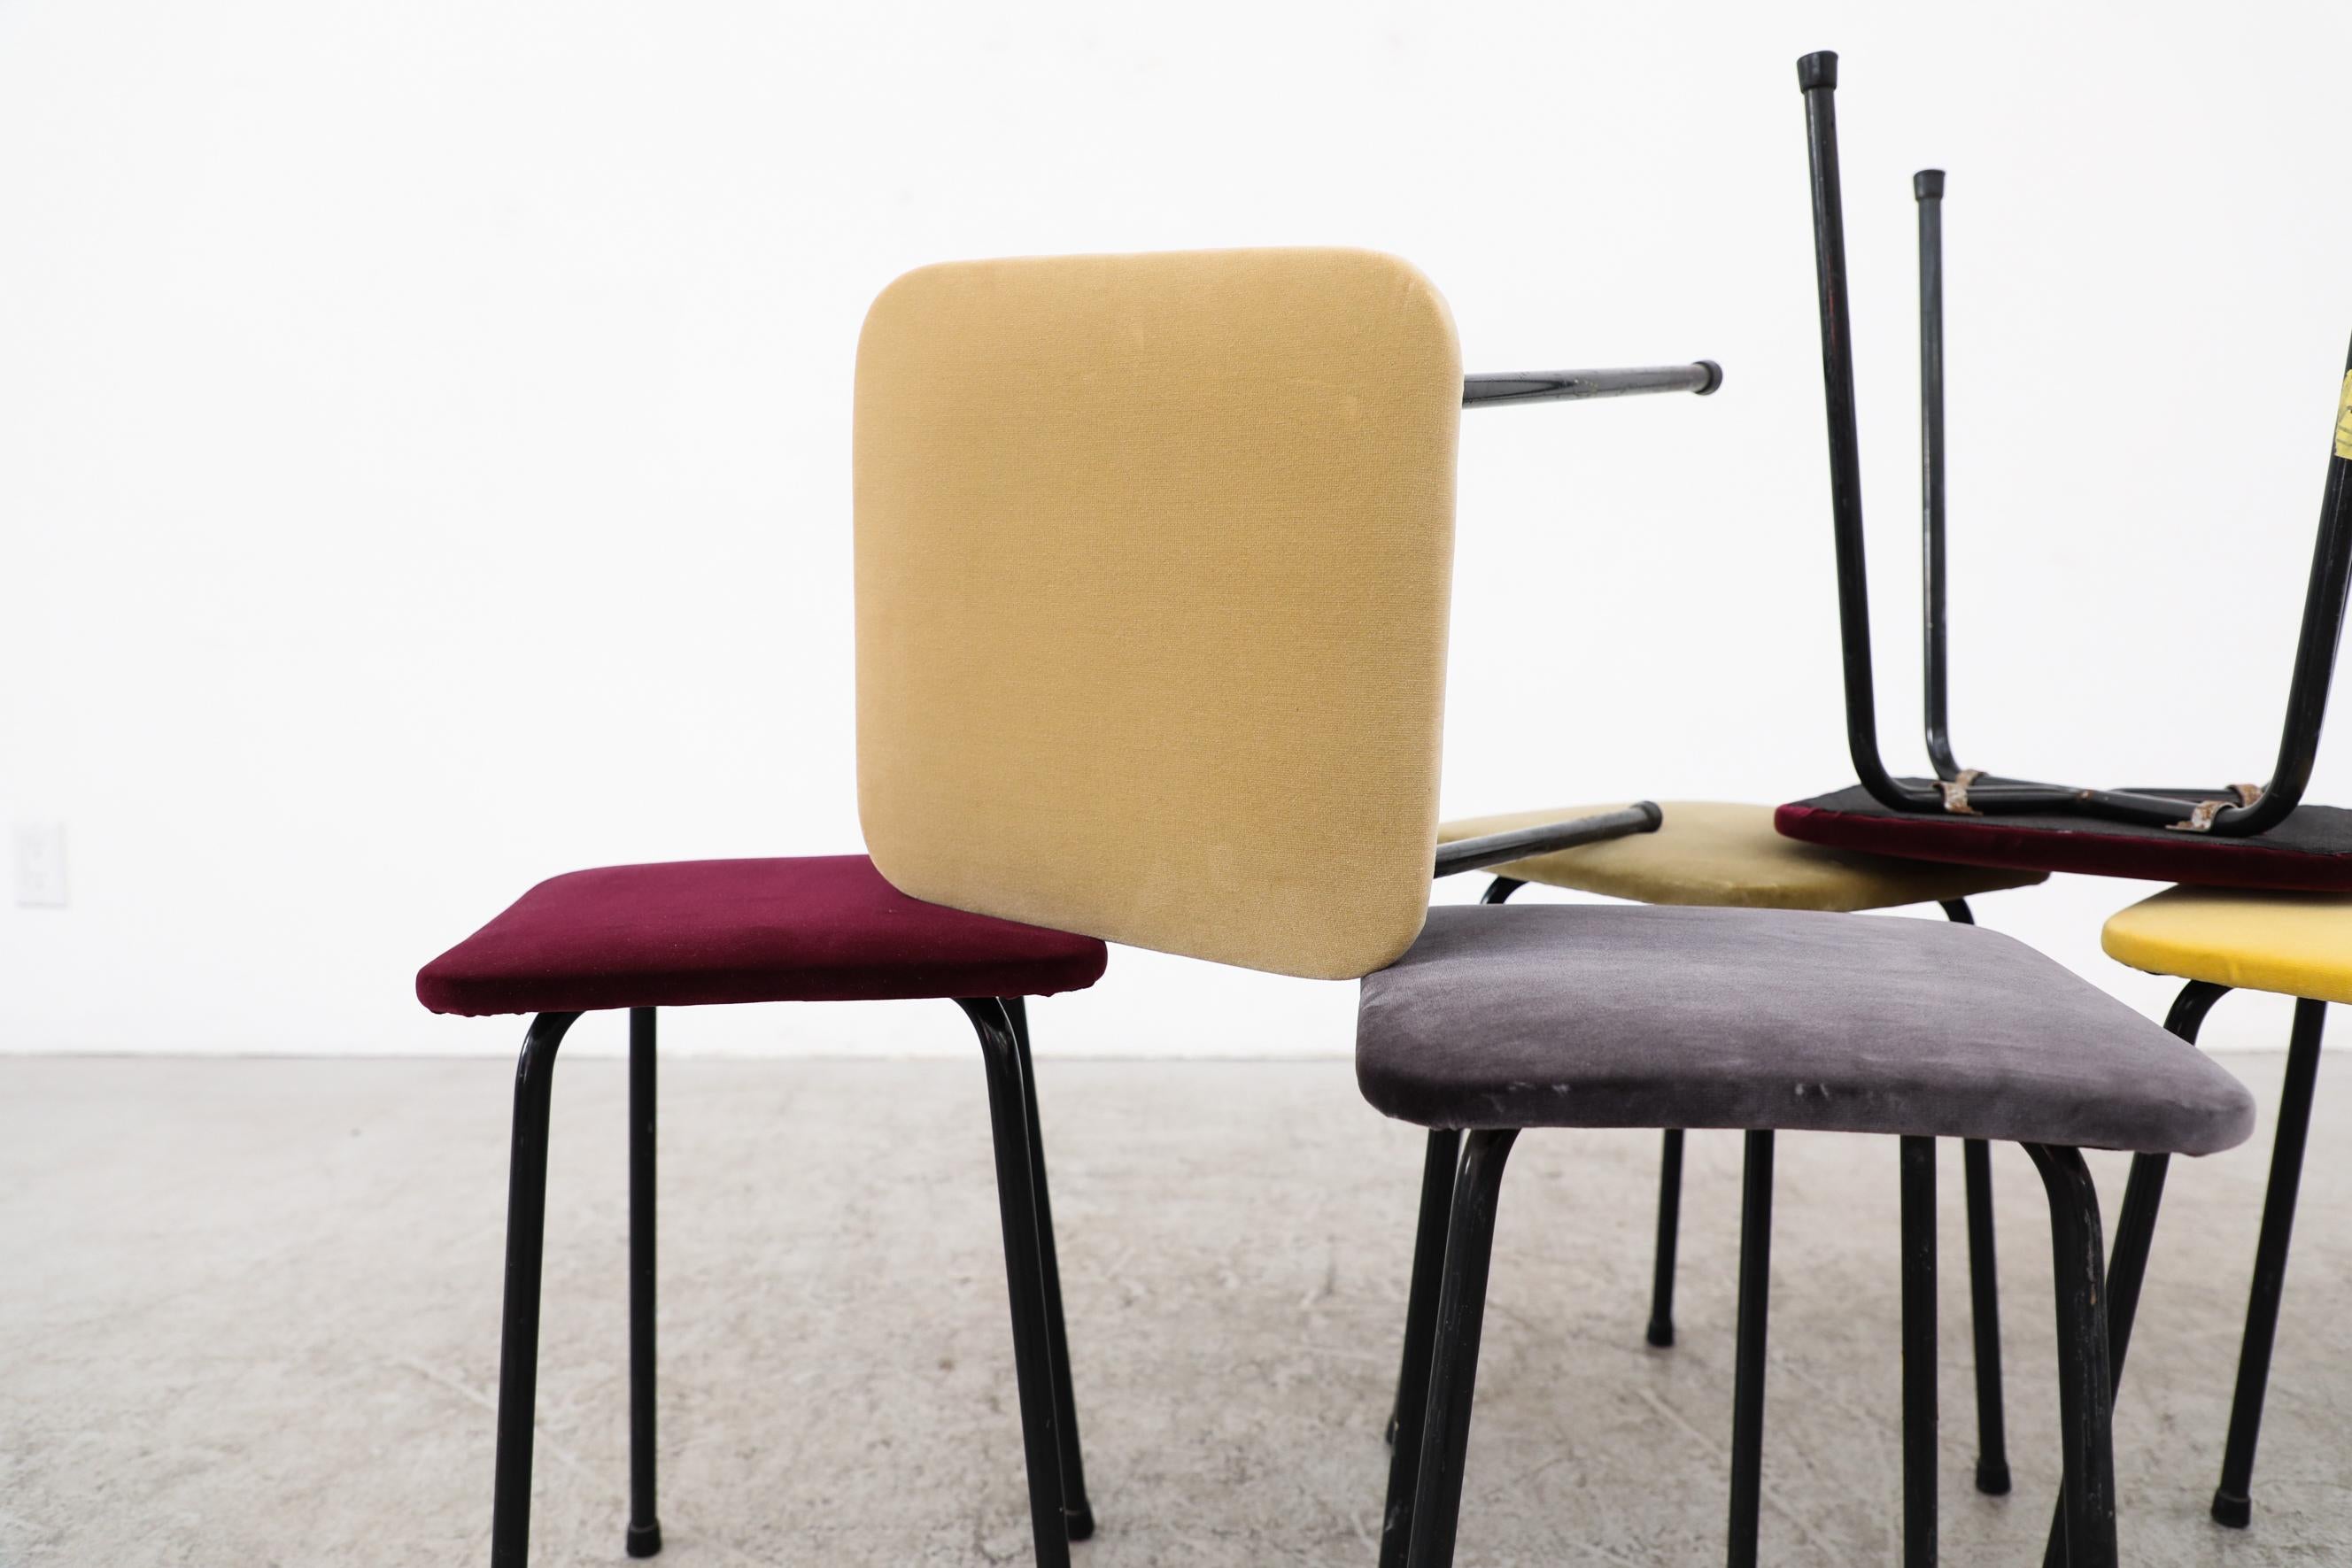 Kembo stools shown with new velvet upholstery. Available in various velvet colors: beige (4), olive green (2), burgundy (2), charcoal gray (1). The frames are in very original condition with visible wear and heavy patina making a beautiful contrast